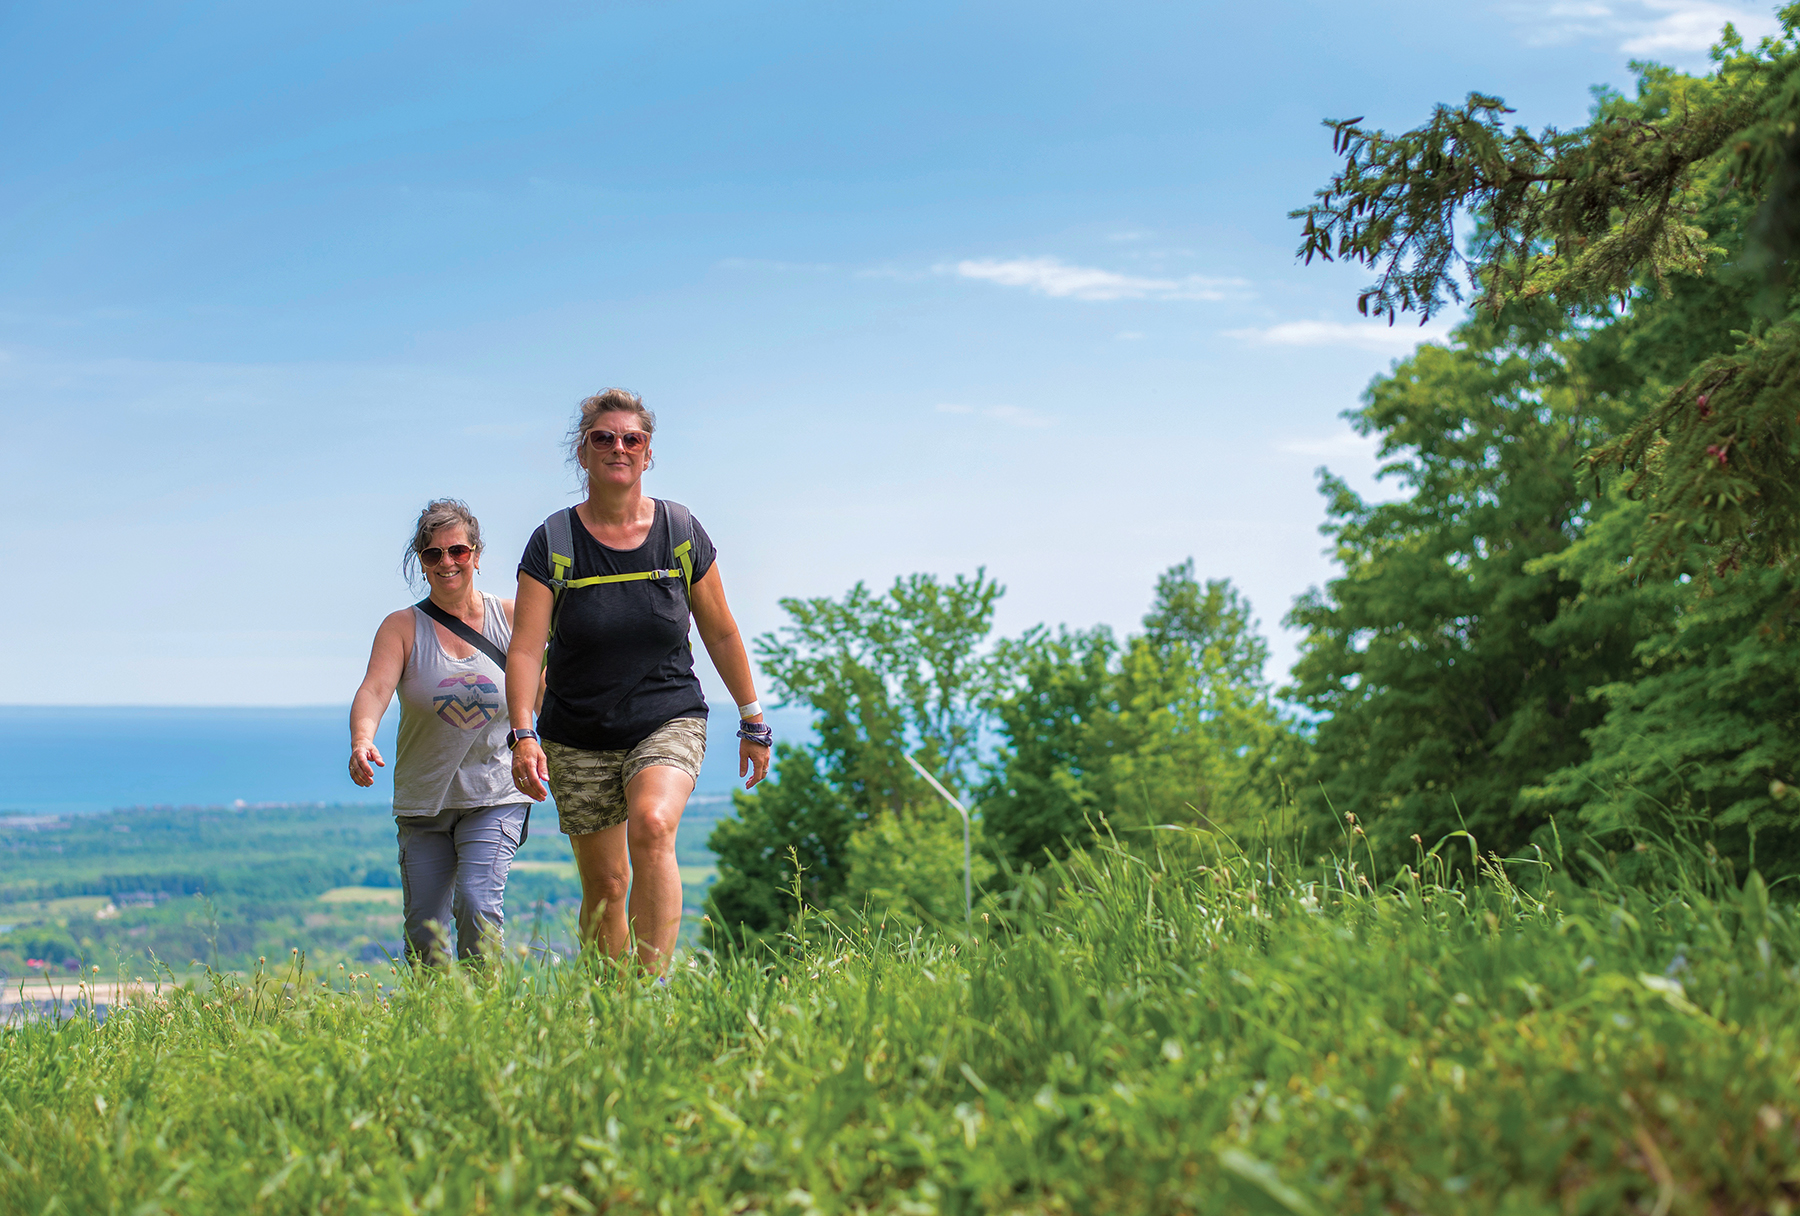 Susan Brindisi (at left) and Cherie Wilson hike The Grind at Blue Mountain Resort, one of 21 hiking and multi-use trails of varying degrees of difficulty open for hikers who have purchased a day pass or have a 5x7 or Ikon season pass for the 2021 season.